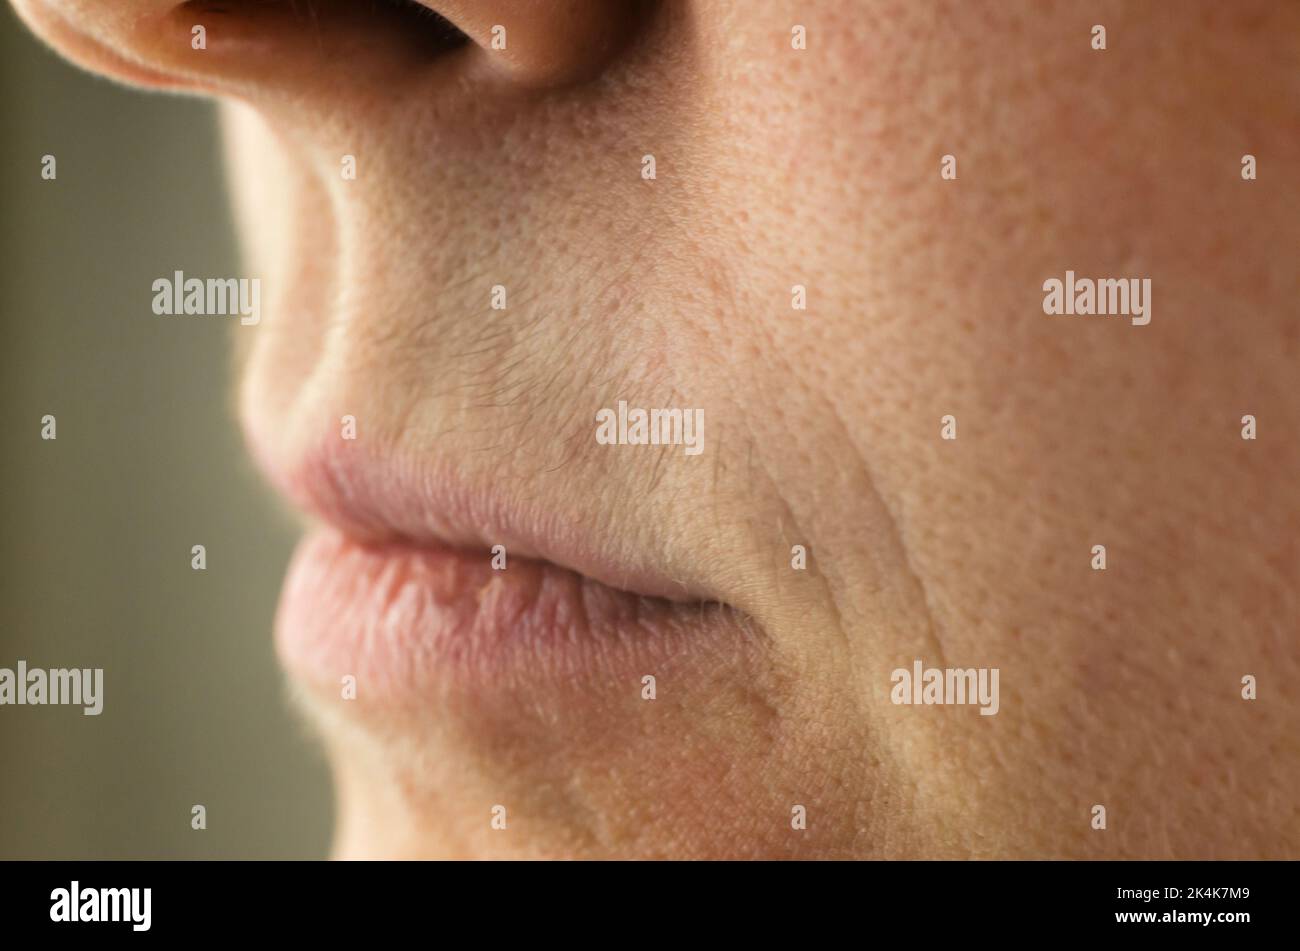 Female mustache close-up. Mustache above the upper lip of a woman, close-up, selective focus Stock Photo